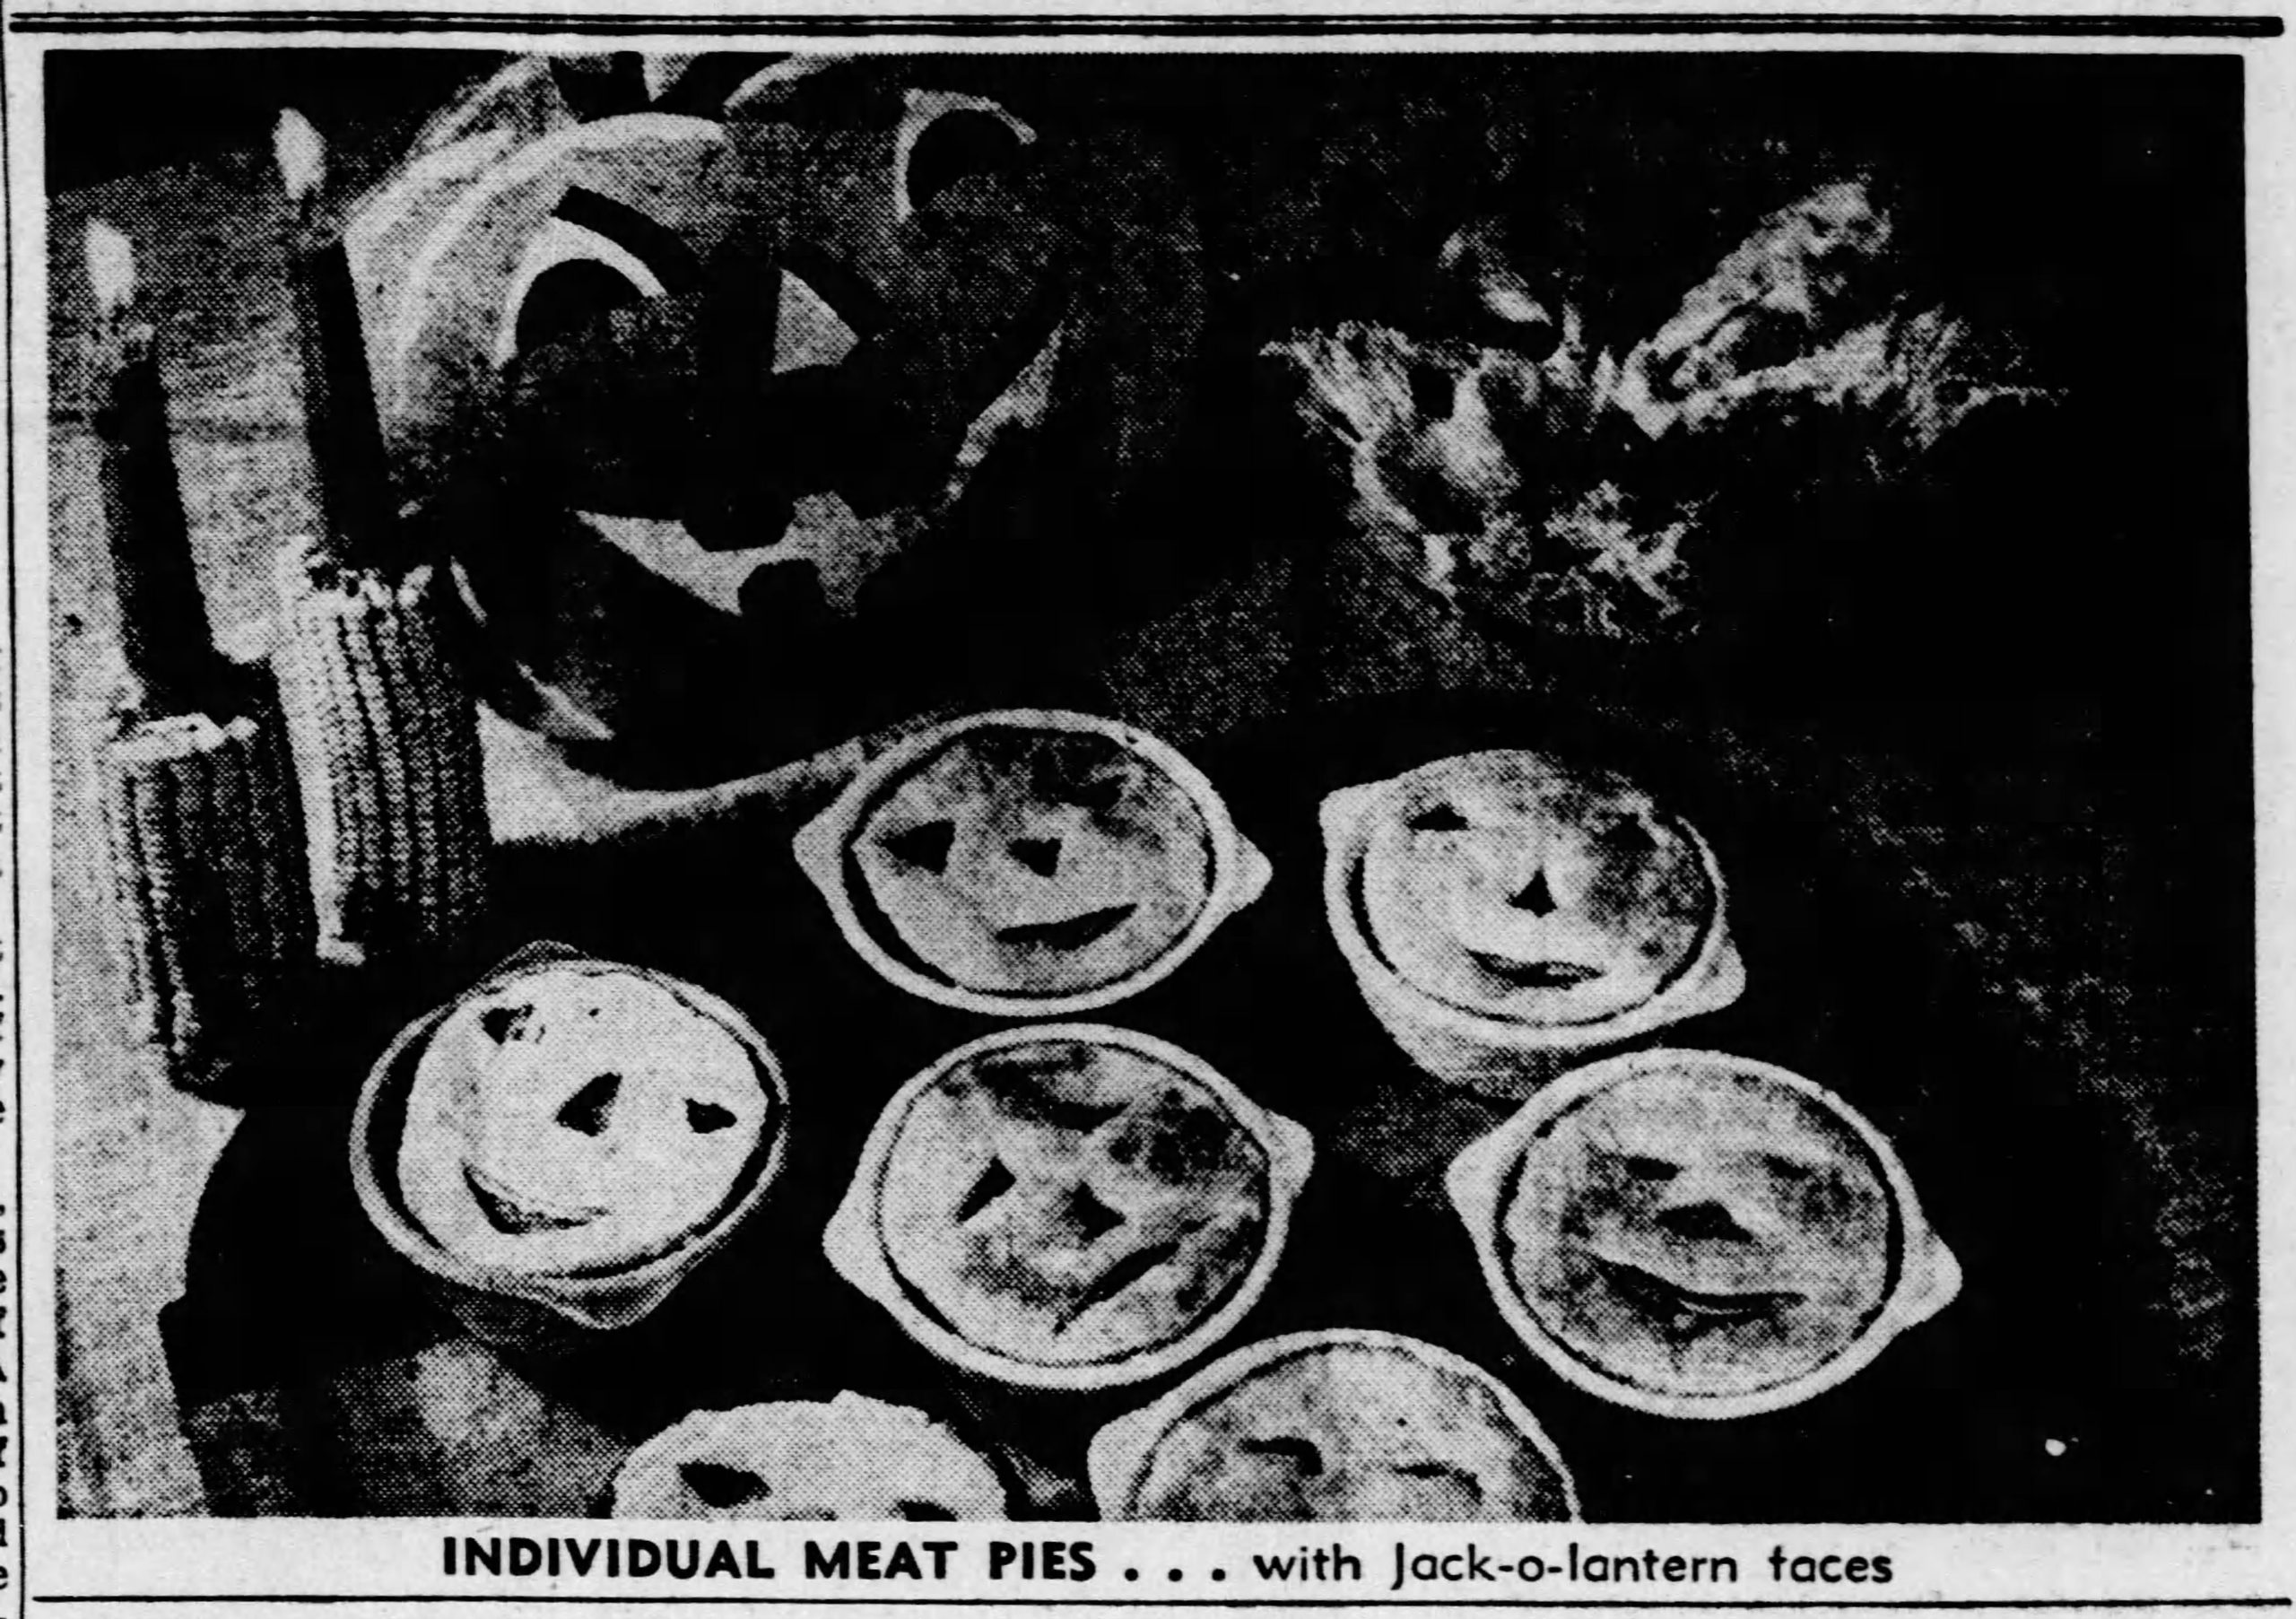 Like these Jack O’Lantern meat pies, nearly all Halloween recipes encouraged home cooks to dress them up with spooky details, Pittsburgh Press, October 24, 1944.